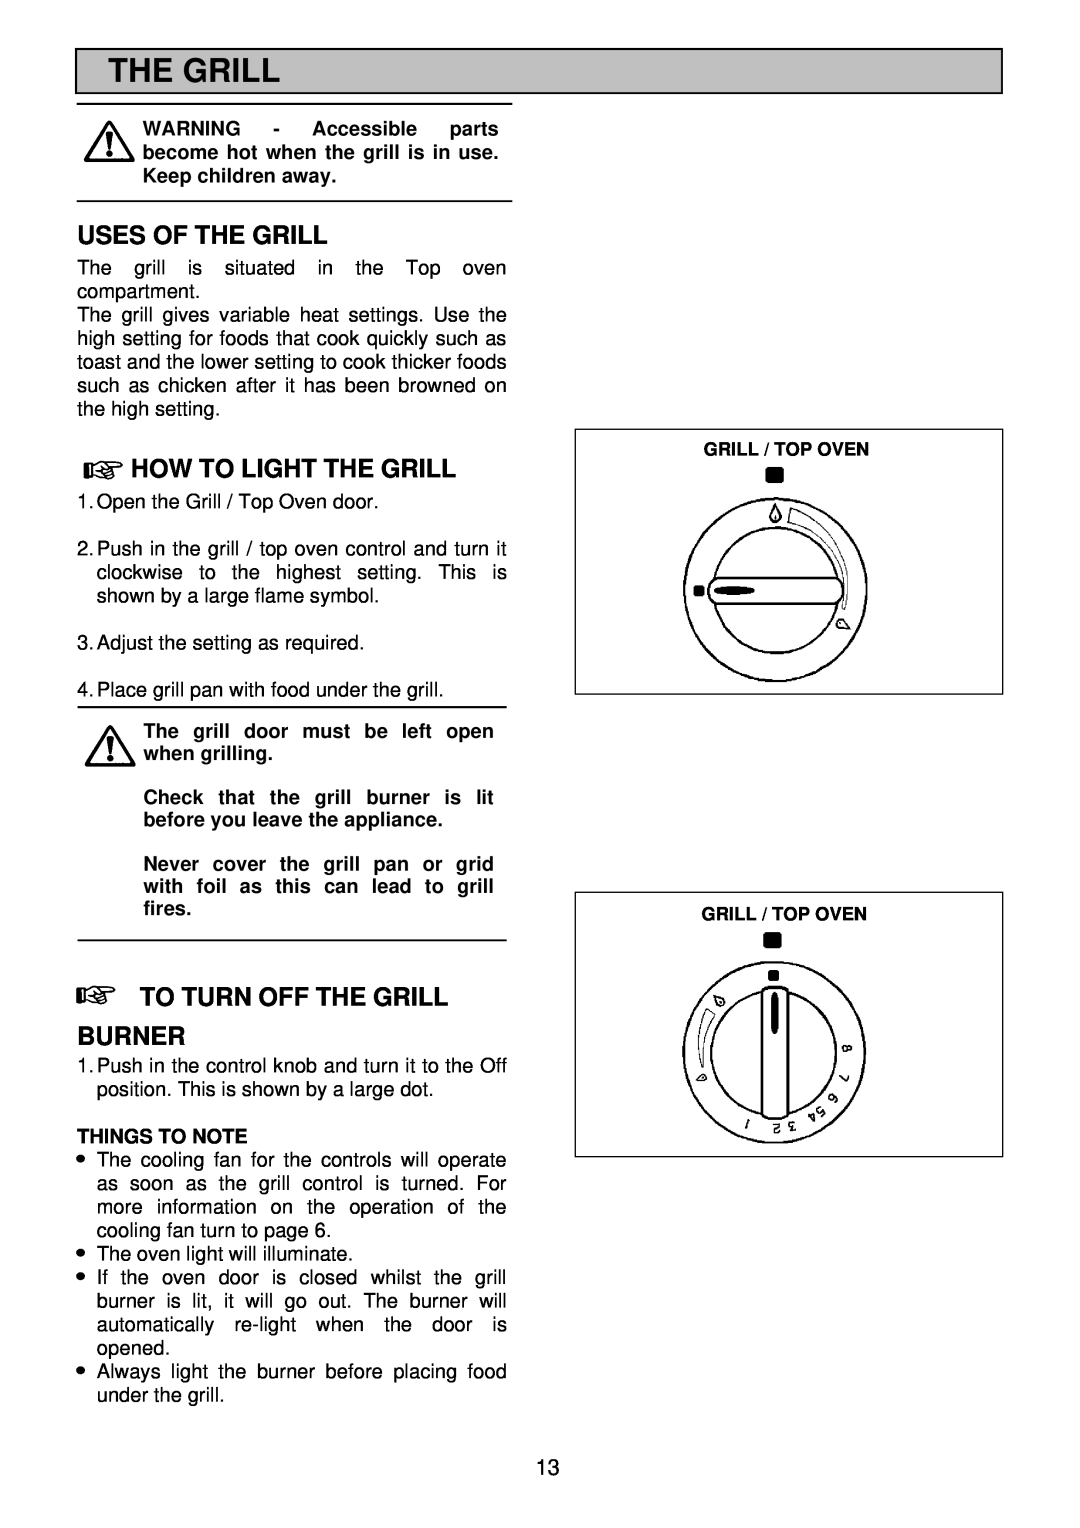 Electrolux EDB 876 manual Uses Of The Grill, How To Light The Grill, To Turn Off The Grill Burner, Things To Note 